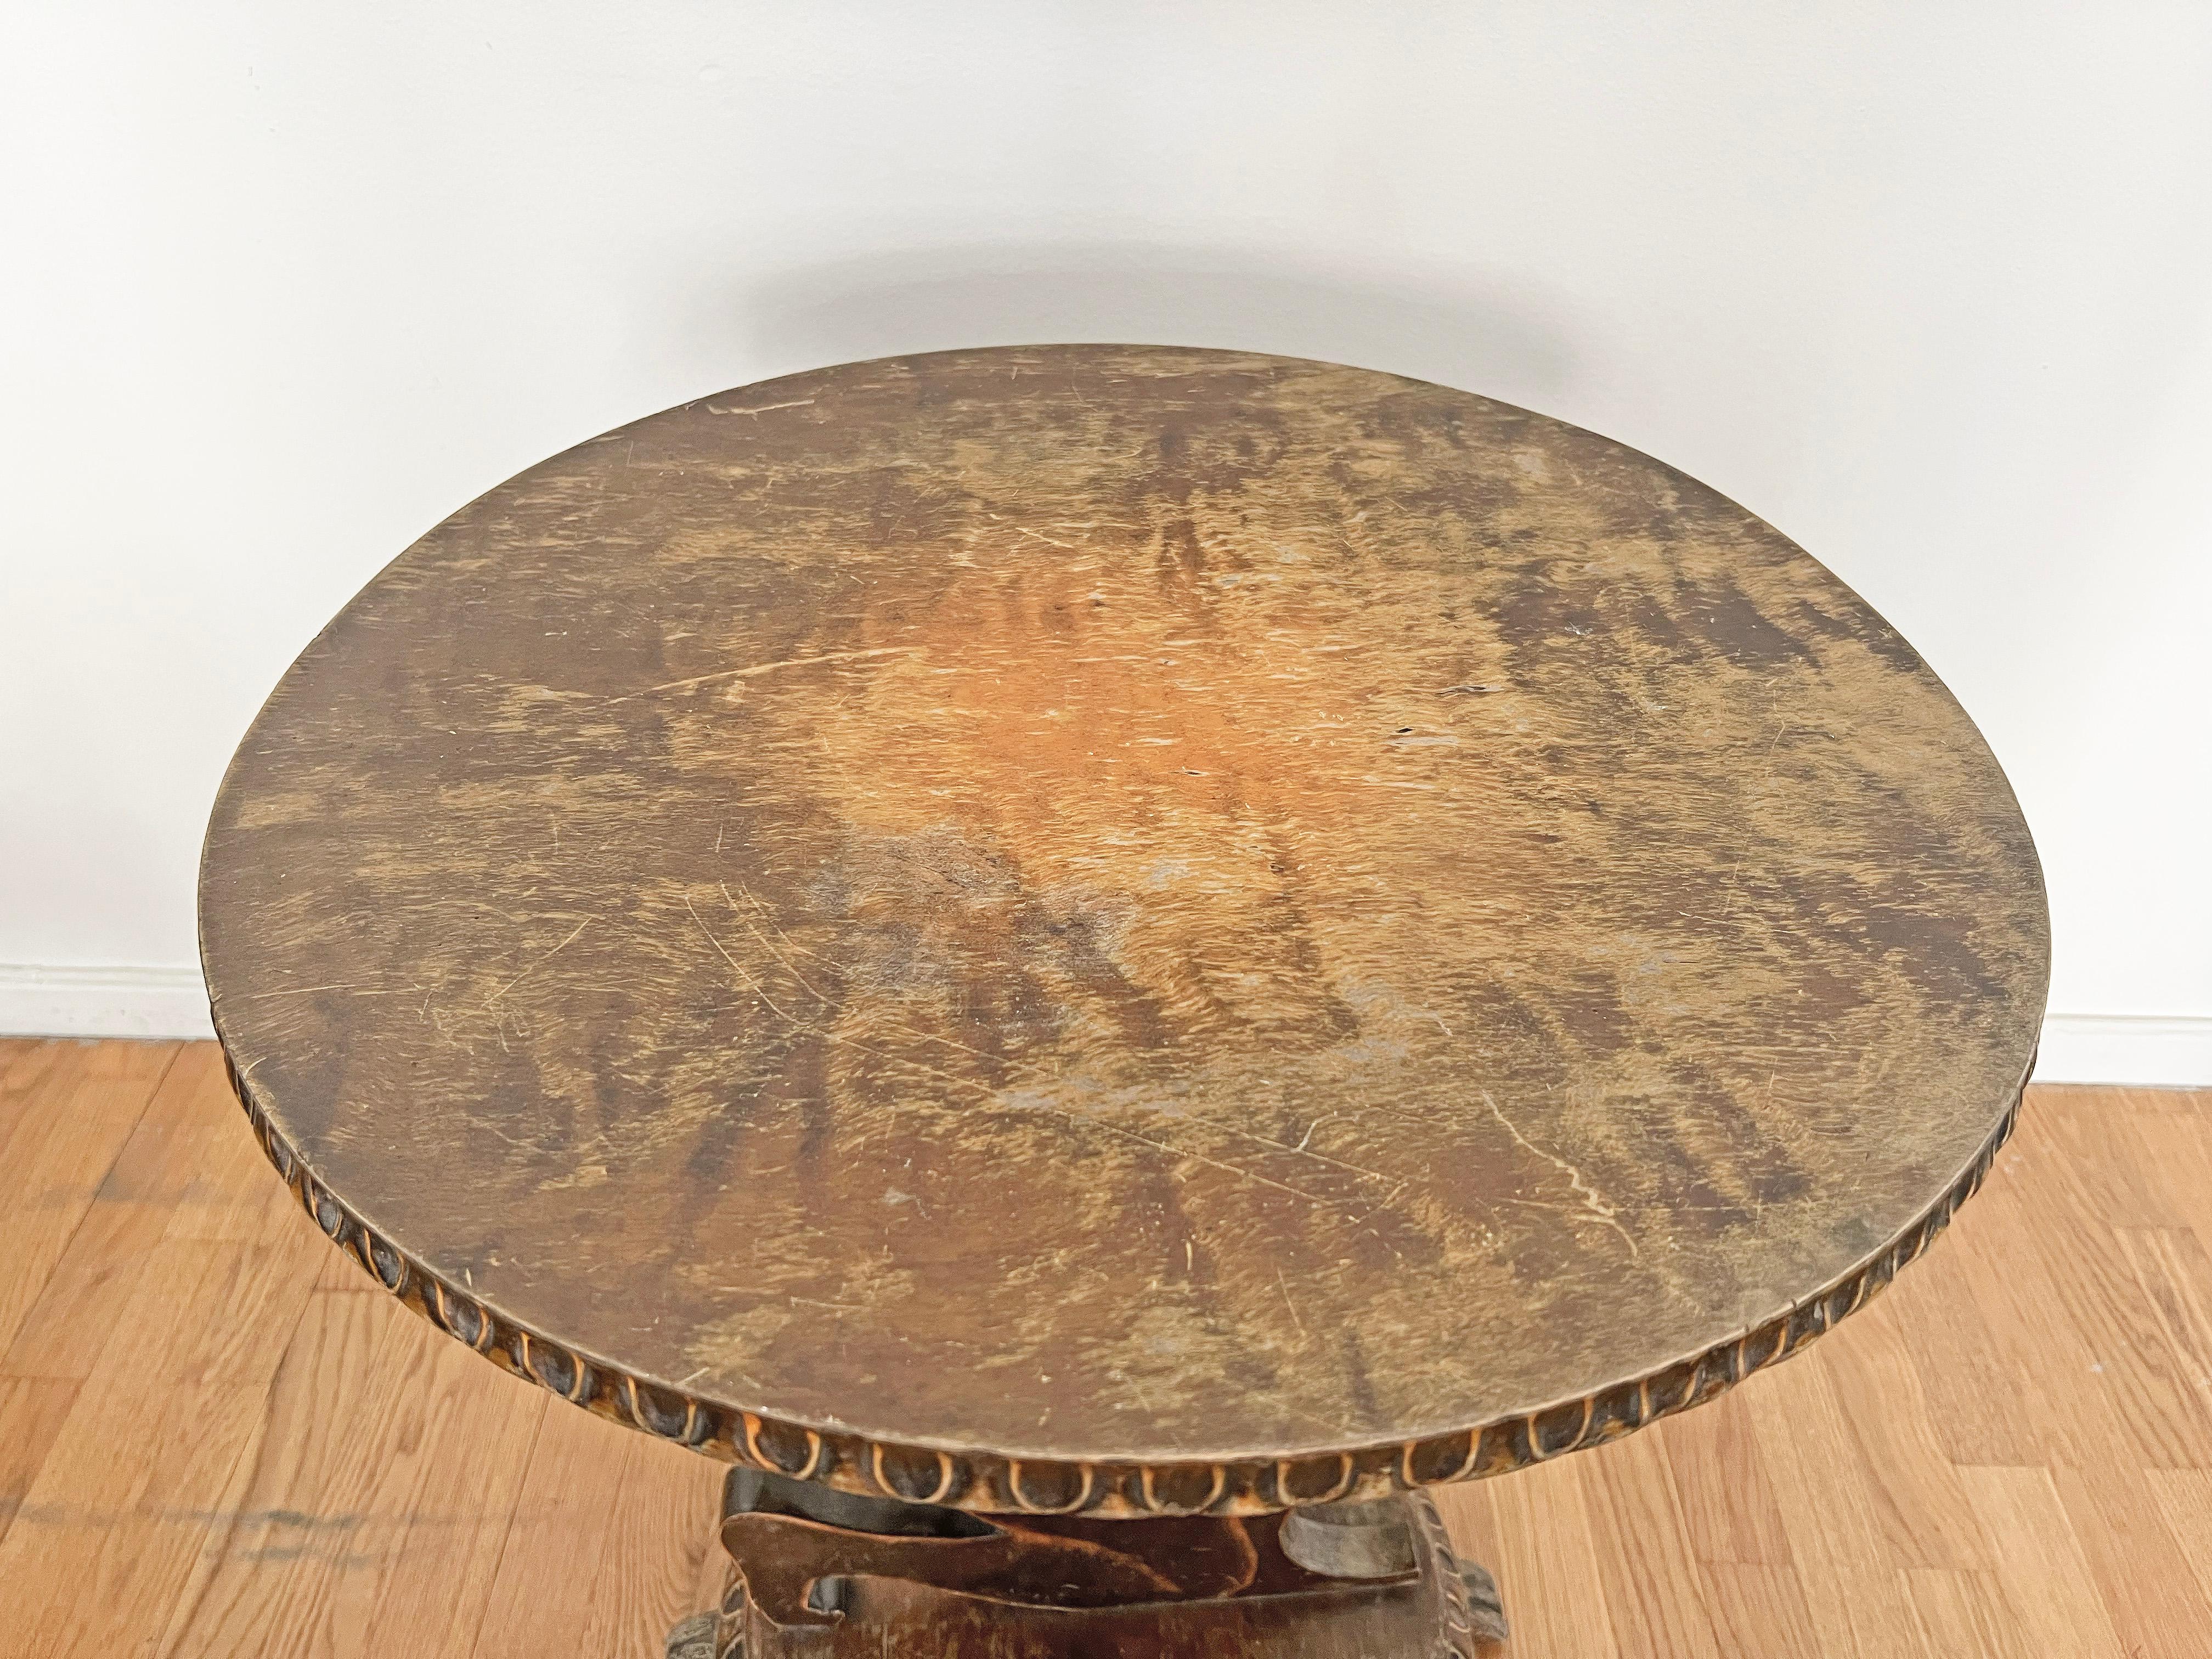 Scandinavian Modern Coffee or Side Table Produced in Sweden, circa 1920 - 1930s For Sale 7